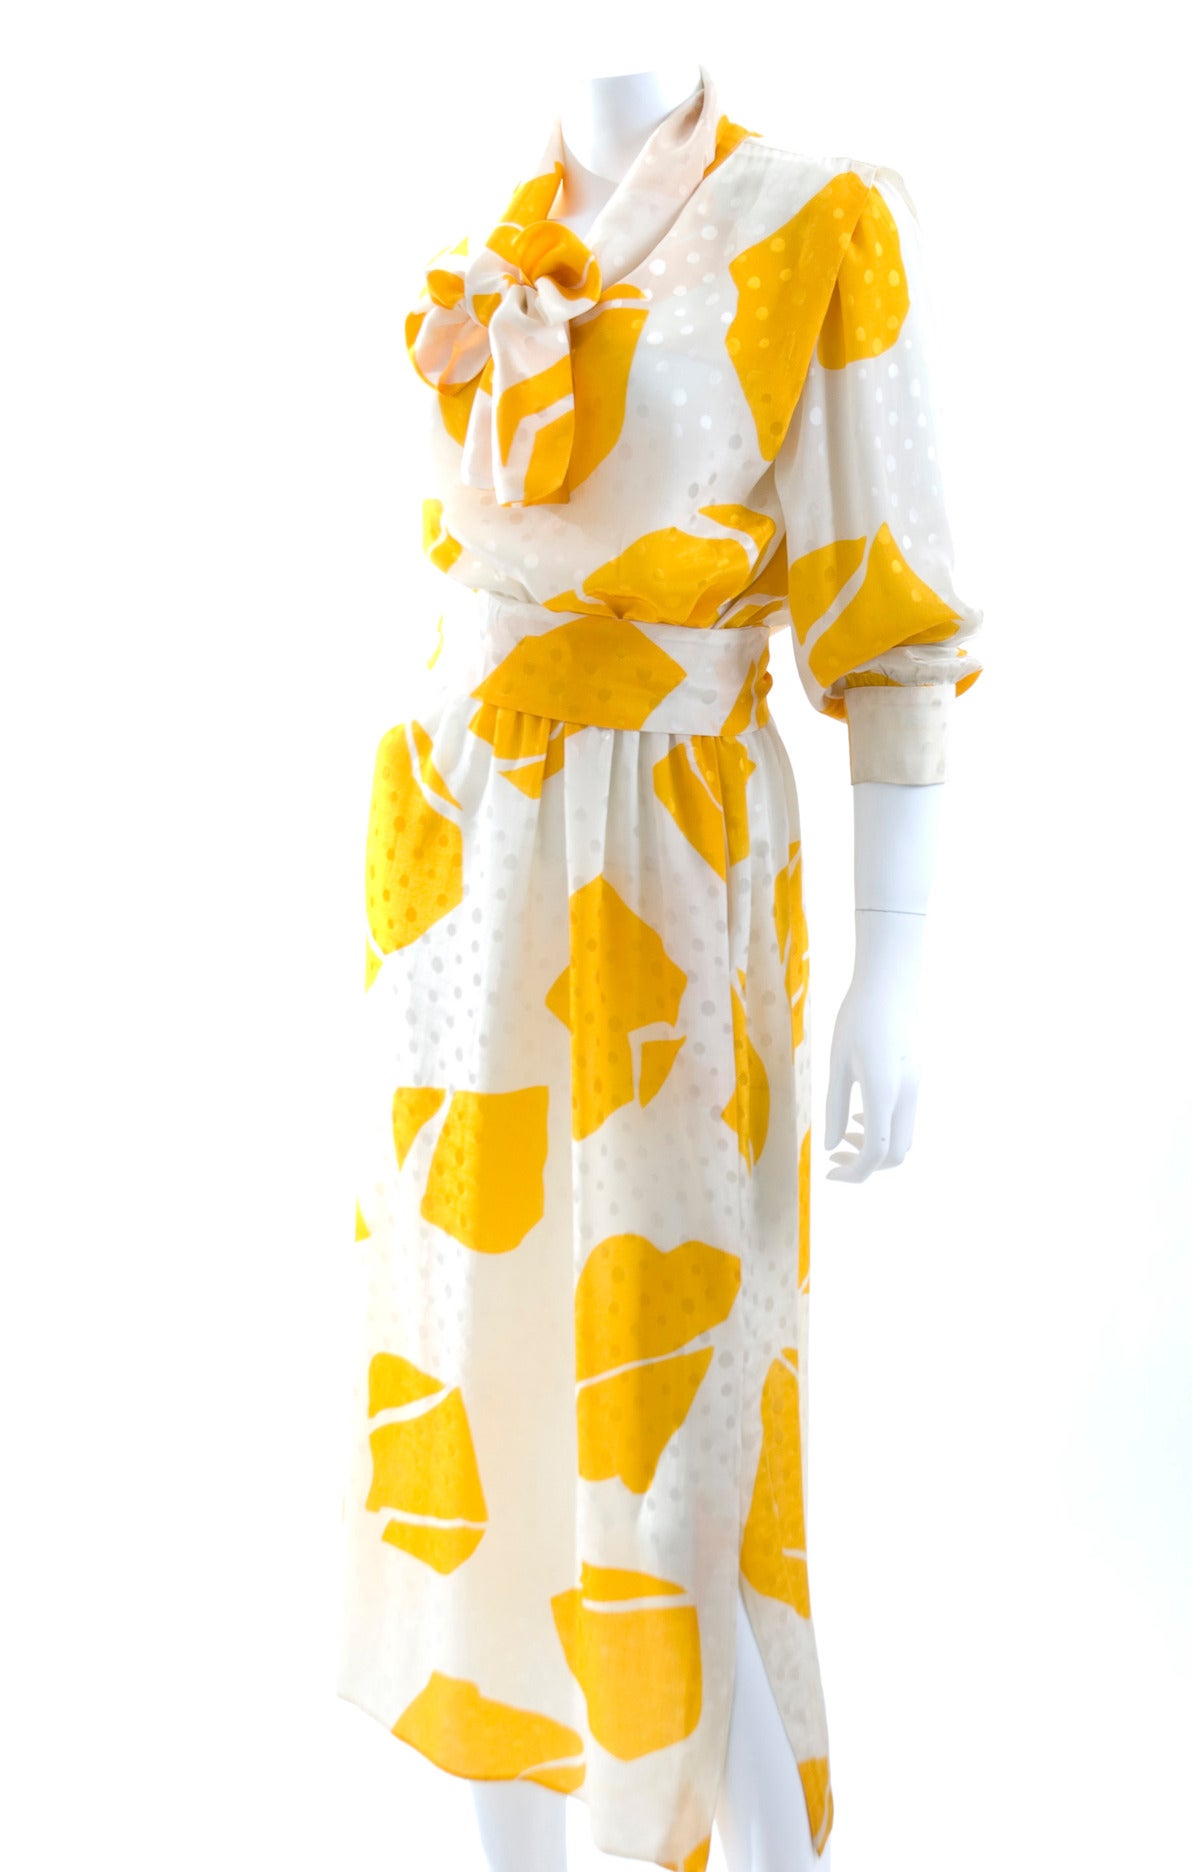 70's Ted Lapidus Silk Dress in beautiful jacquard silk in white and yellow.
Slip-on style, elastic waist line and pockets in the side seams.
The dress is not lined and semi sheer.
In great condition to wear - dry cleaned.
Size label is